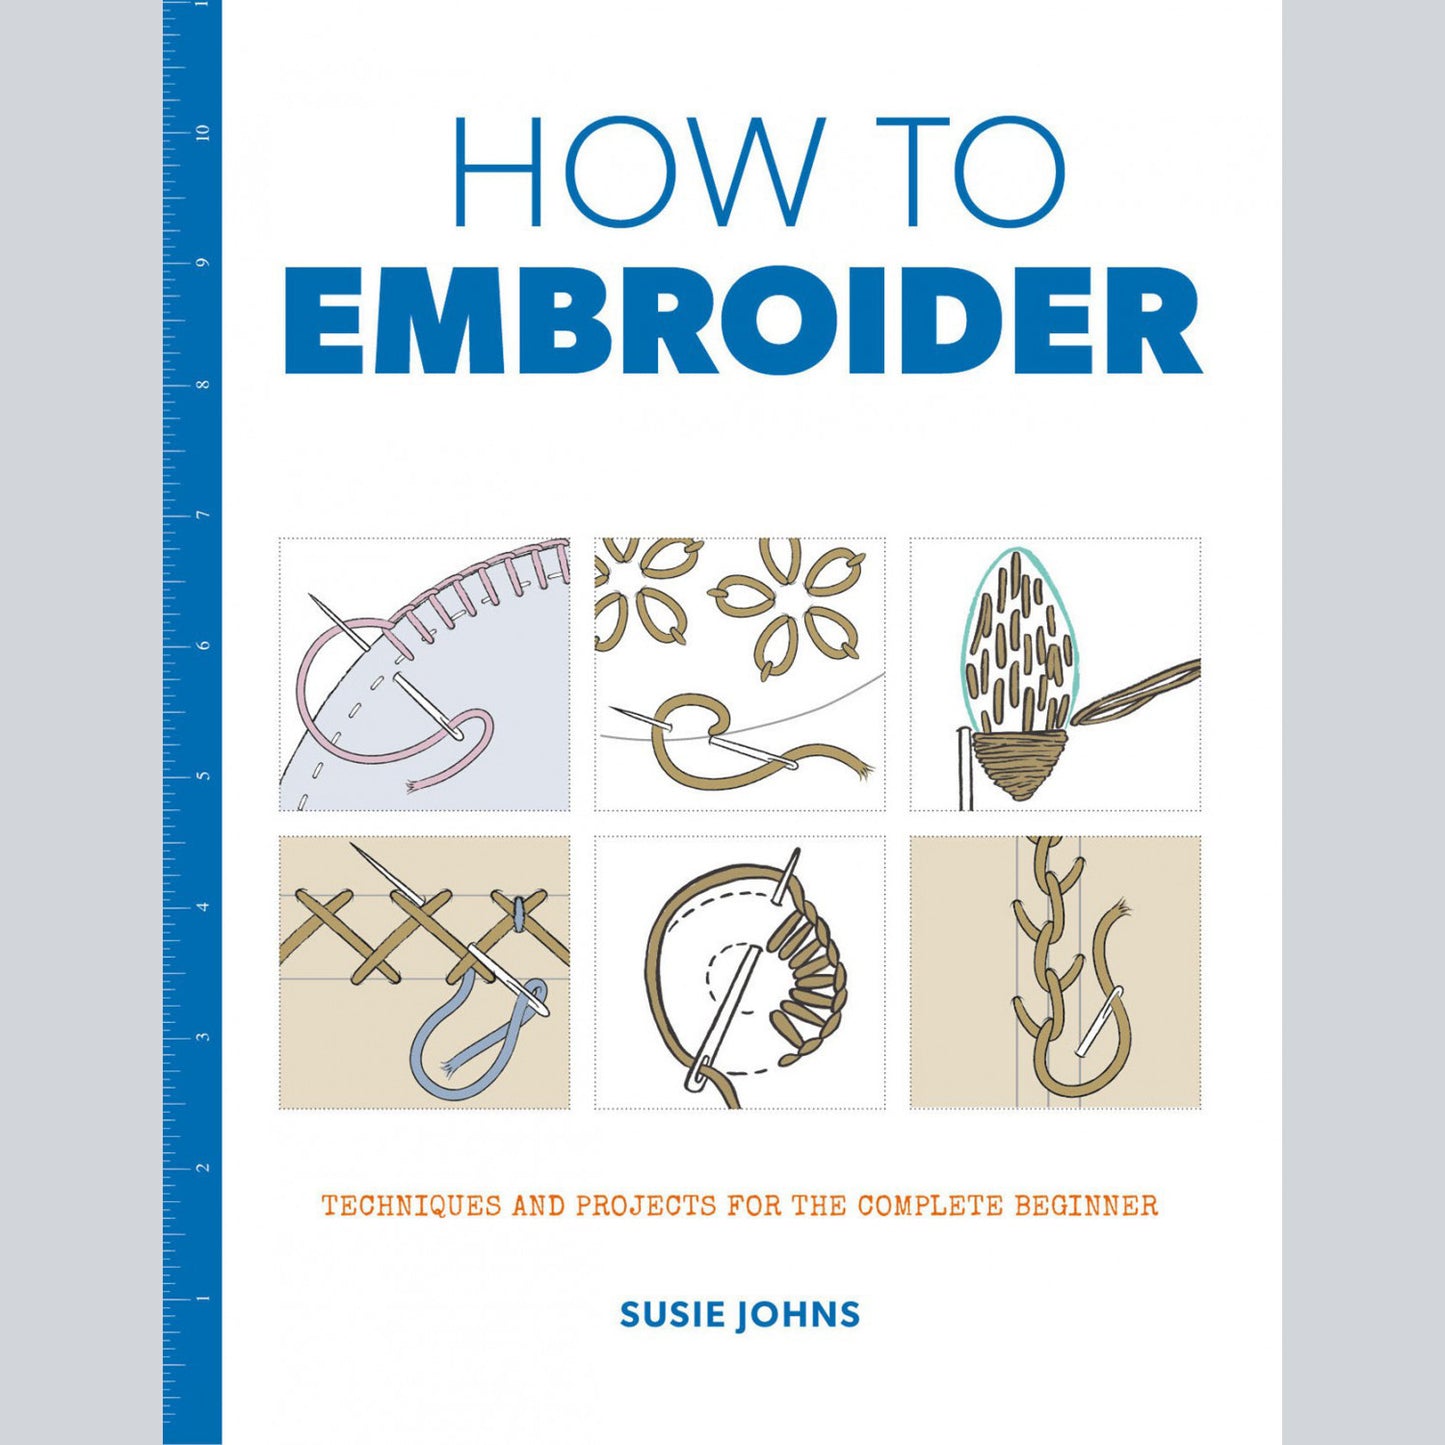 How to Embroider Book Primary Image